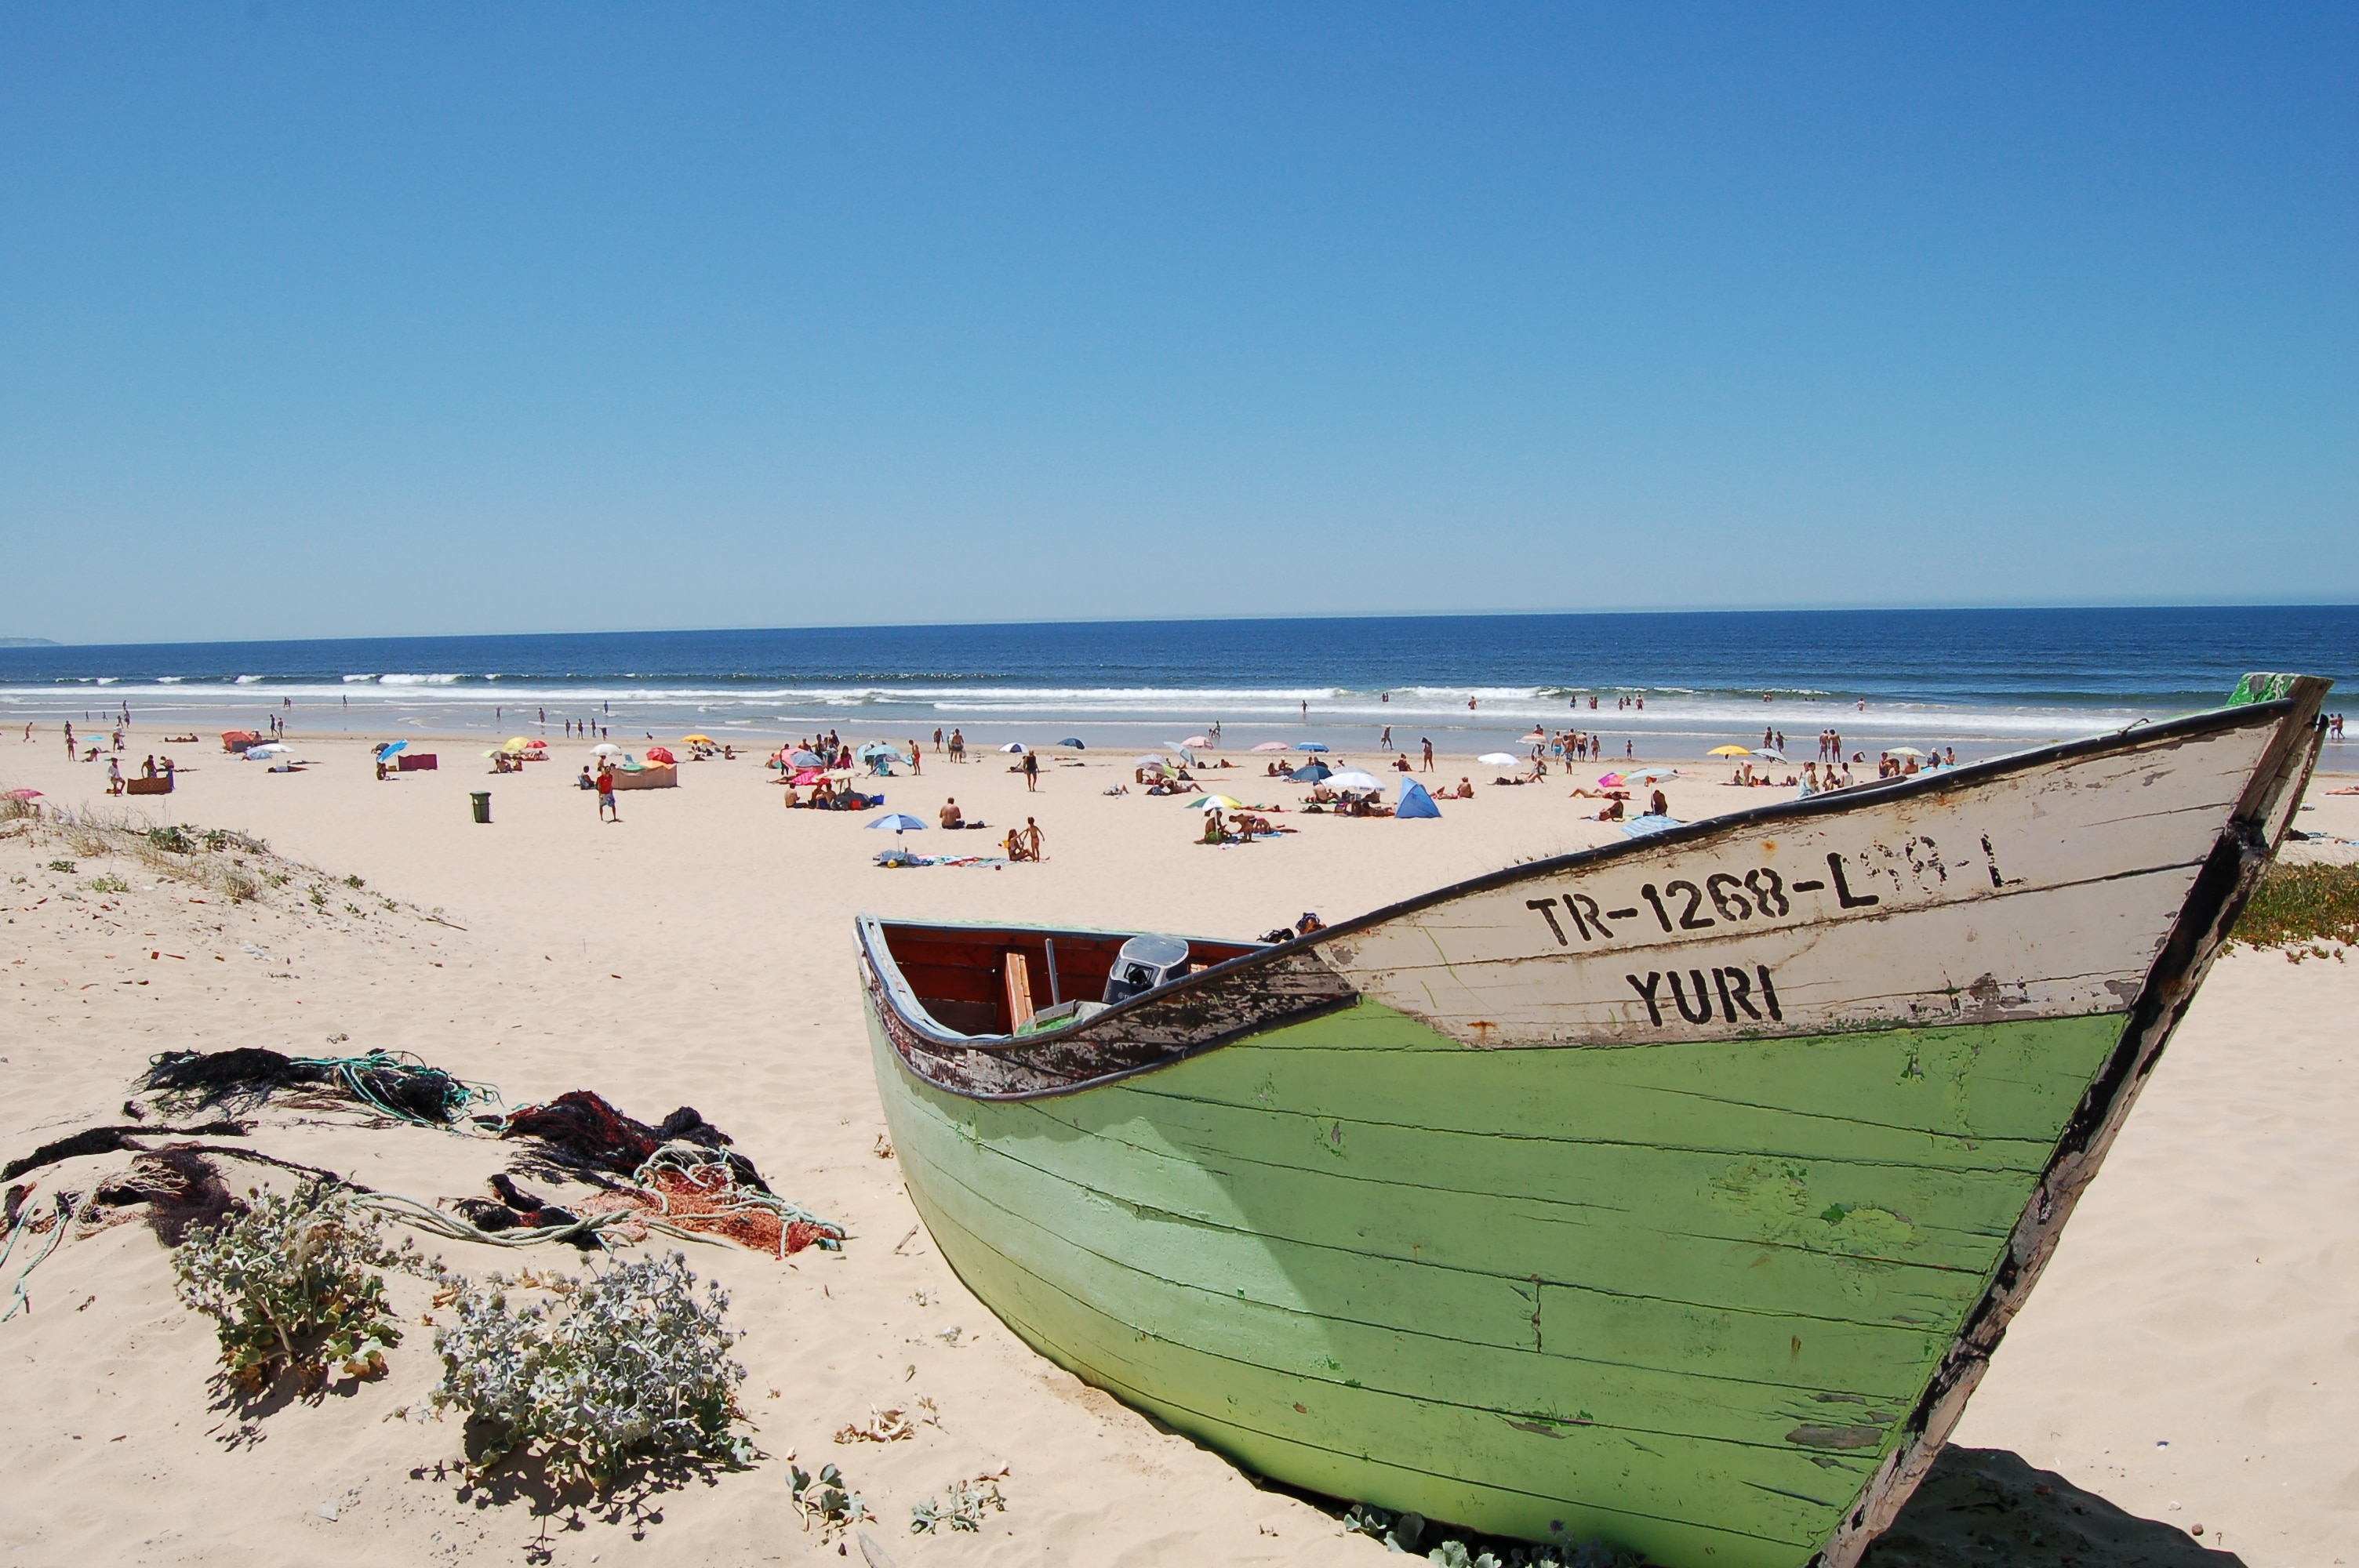 green and white wooden boat in the sand pictuure during day time